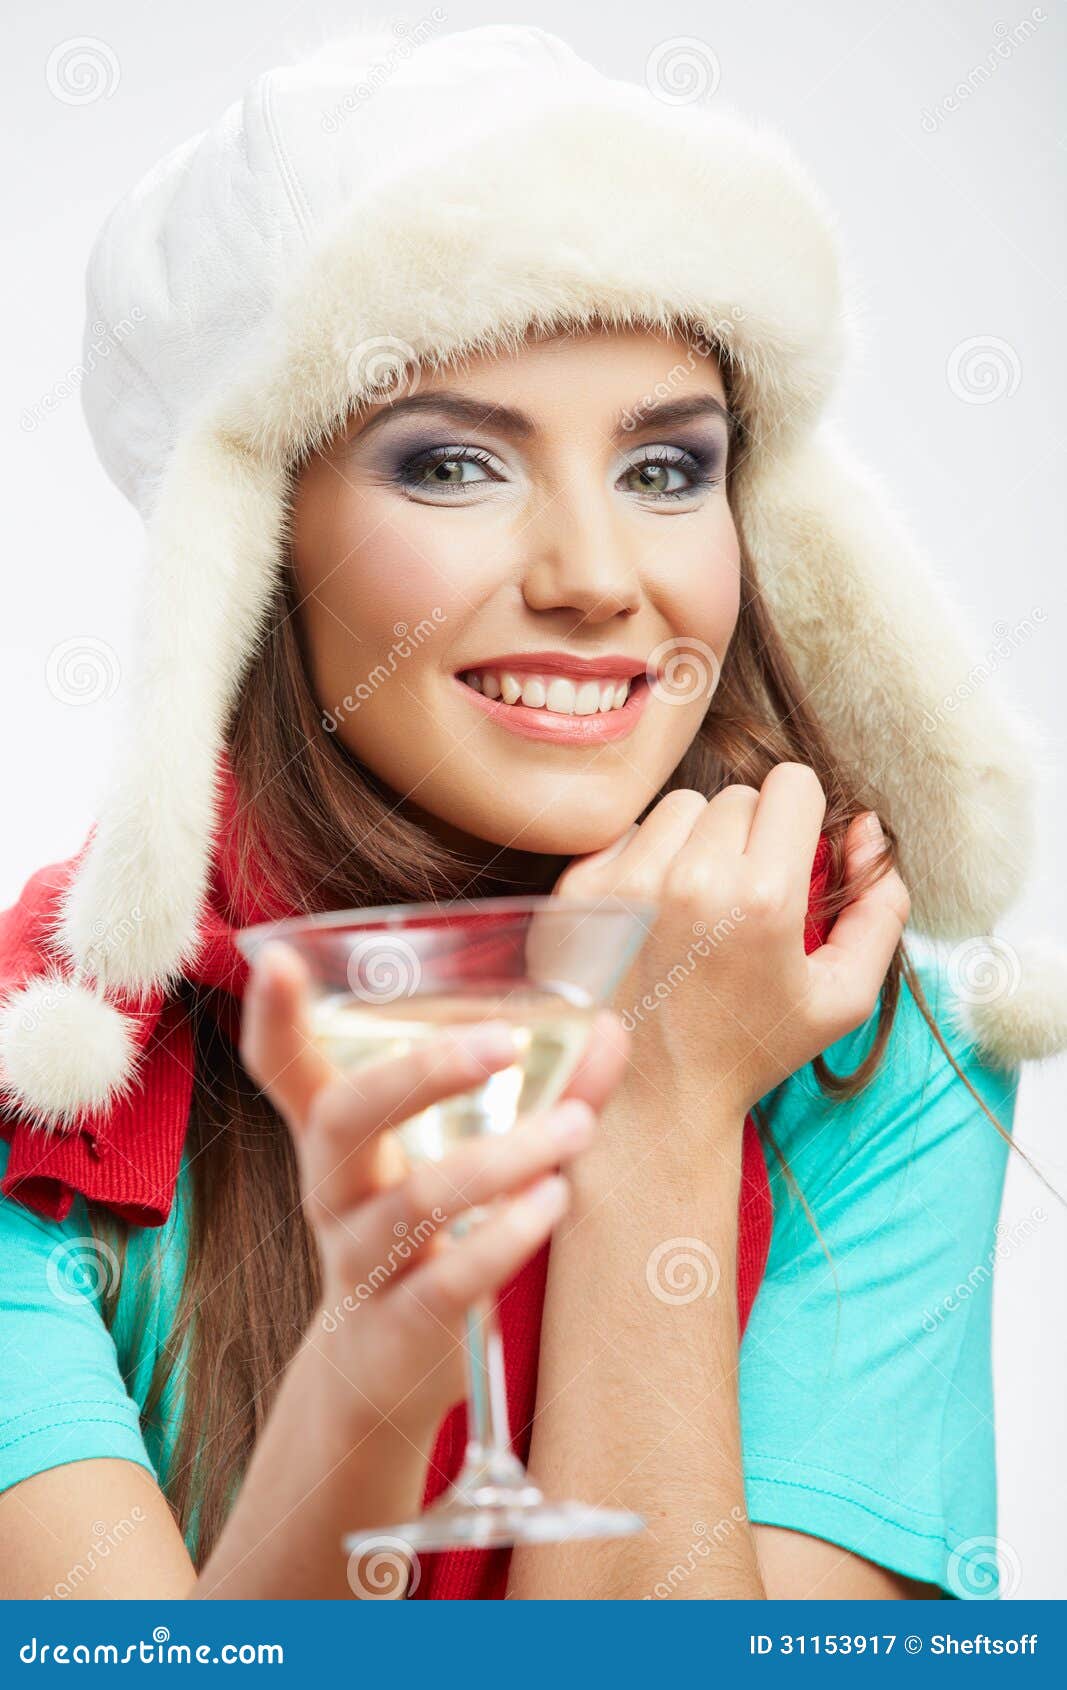 Winter Hat and Red Scarf on Young Happy Woman. Stock Image - Image of ...